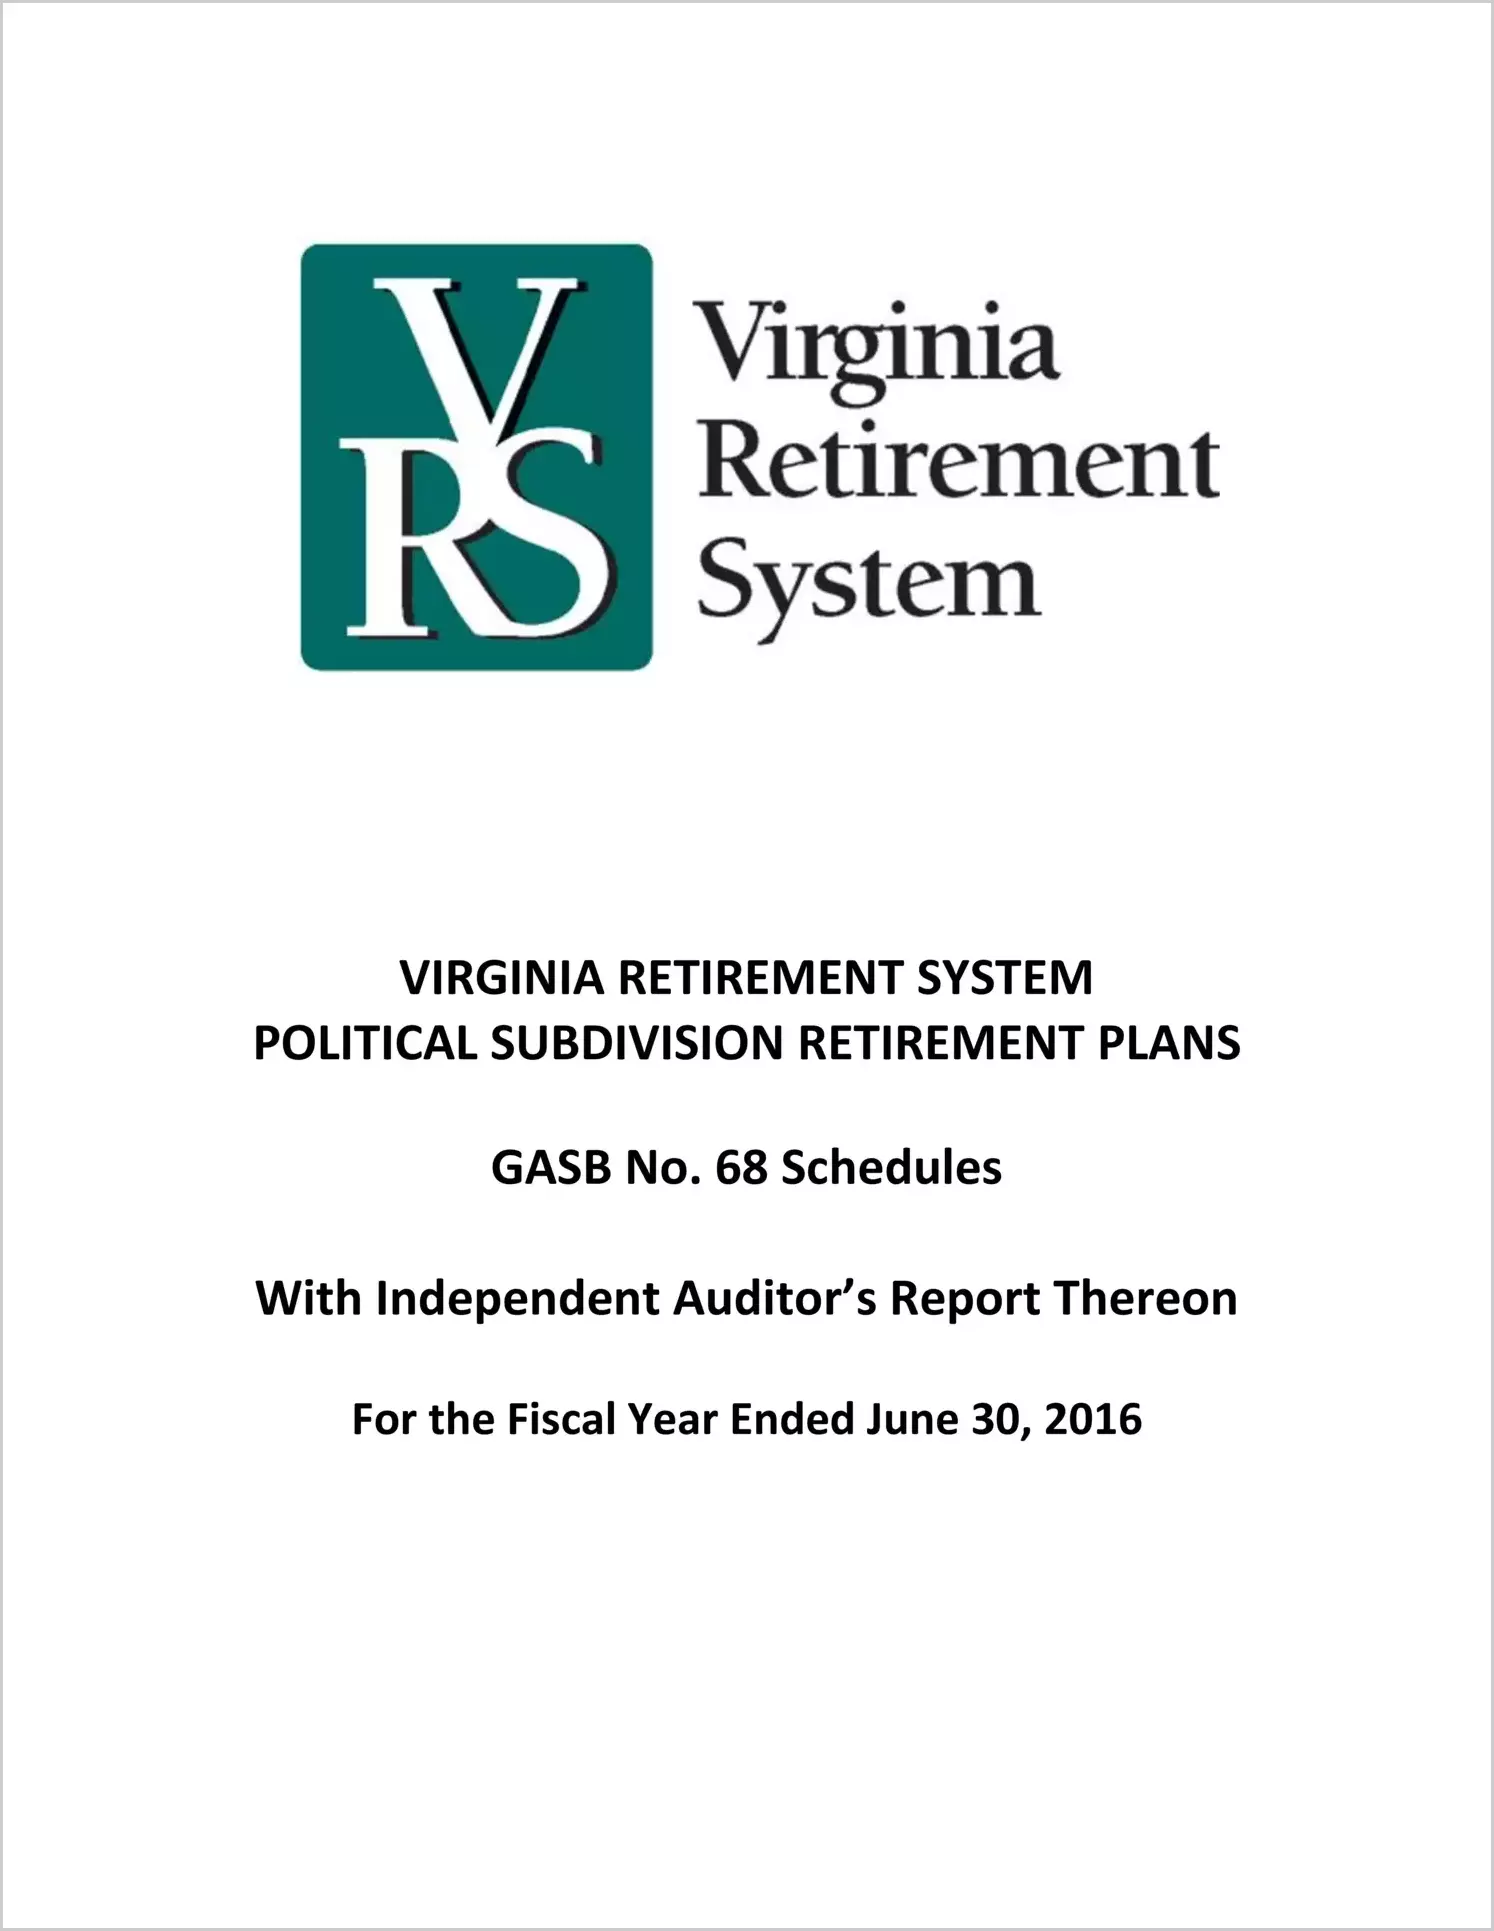 GASB 68 Schedule - Political Subdivision Retirement Plan for the year ended June 30, 2016